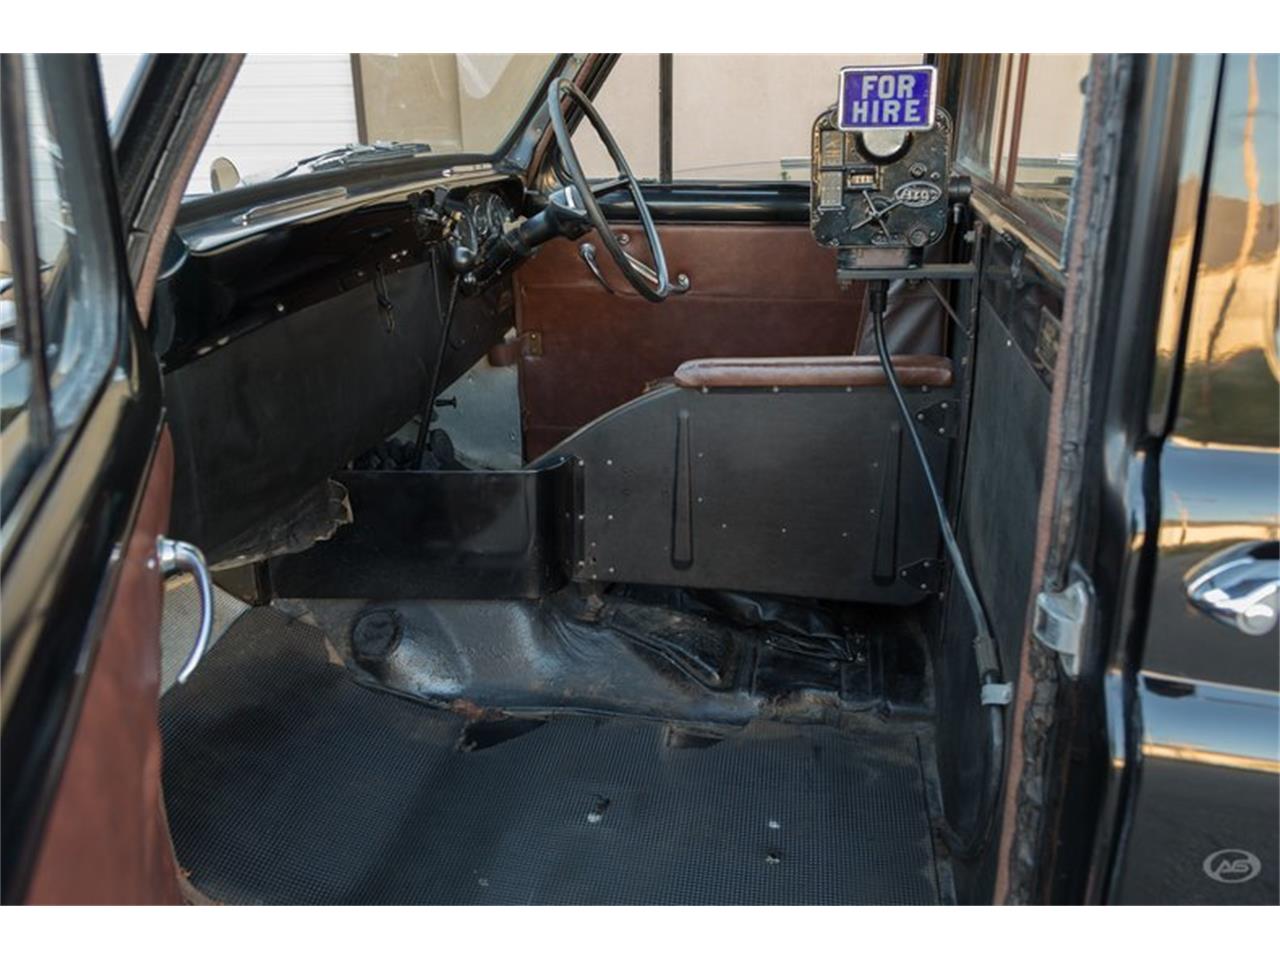 1964 Austin FX4 Taxi Cab for sale in Collierville, TN – photo 72